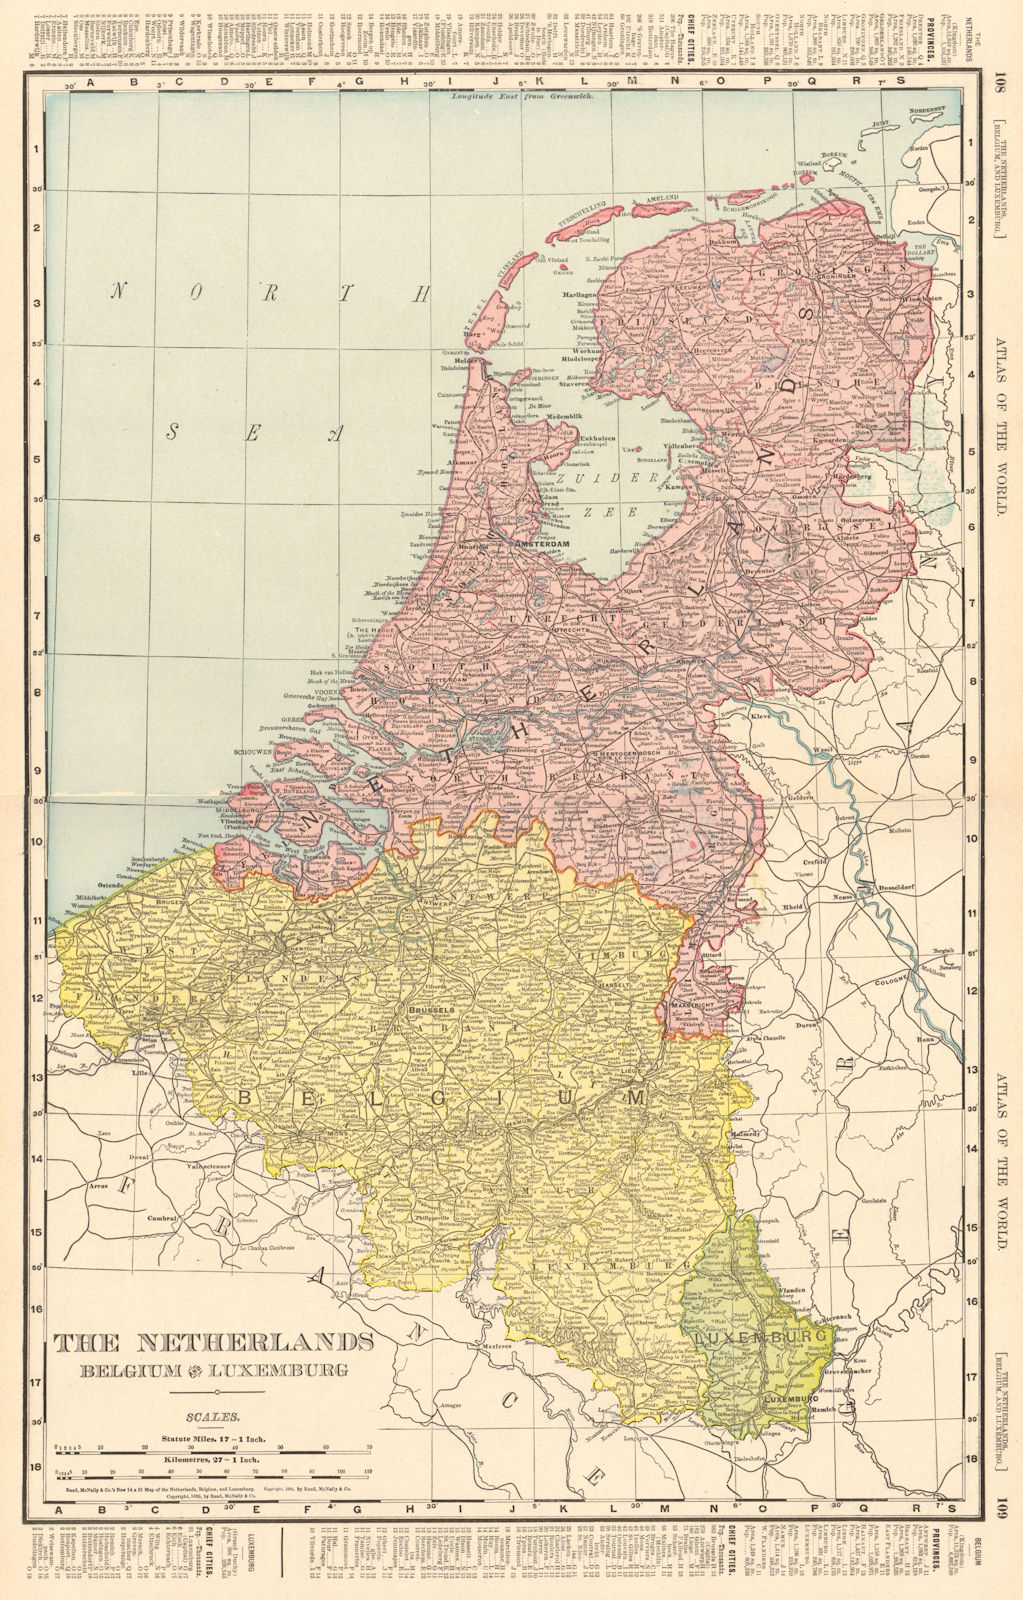 Associate Product Netherlands, Belgium & Luxembourg. RAND MCNALLY 1906 old antique map chart